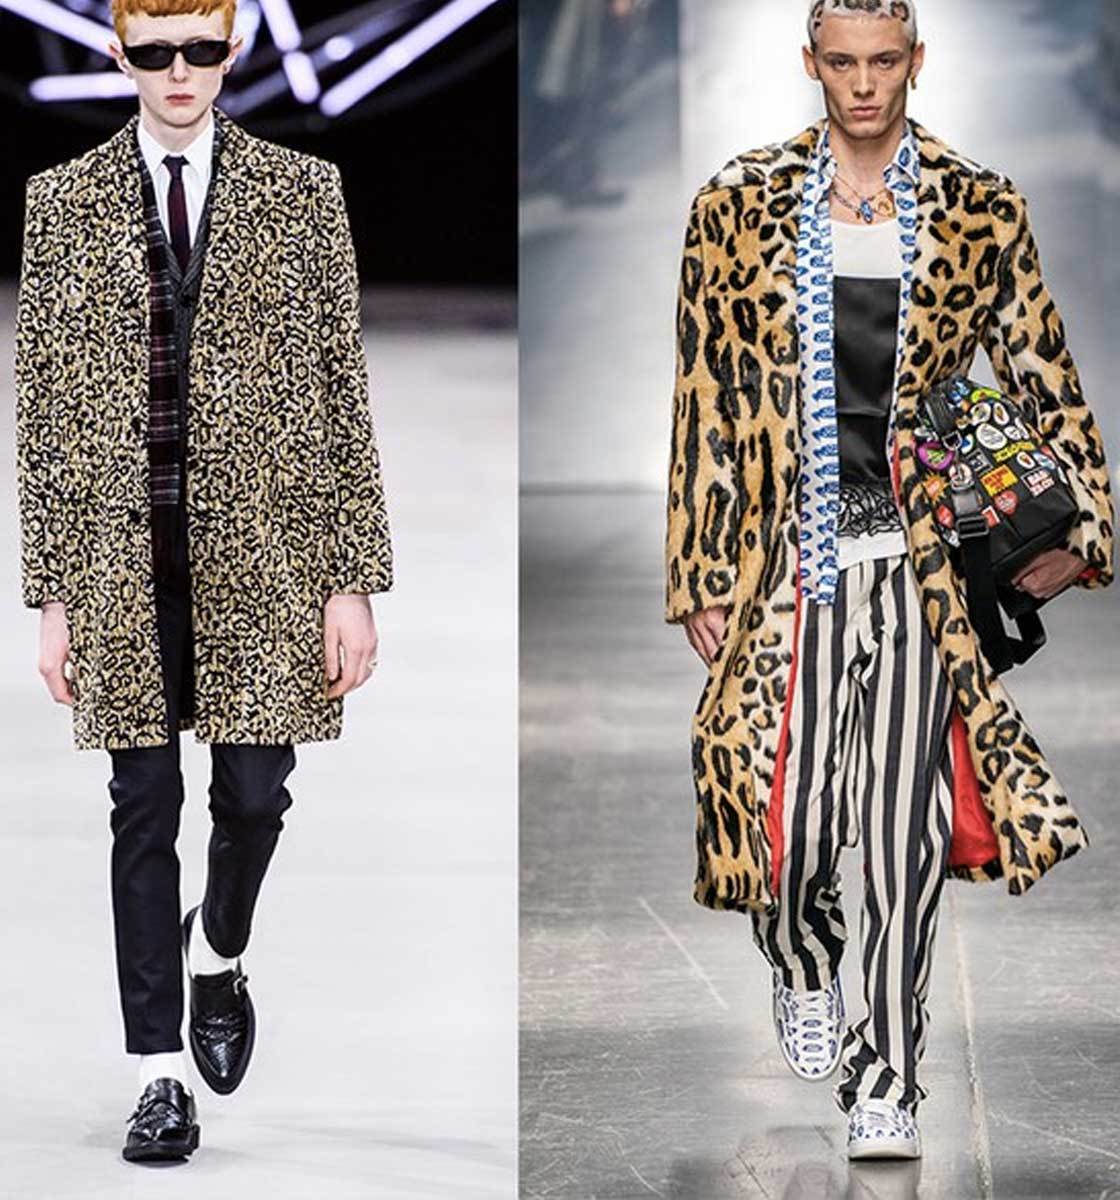 Our Top Five Faves from Vogue's FW19 Menswear Runway Report